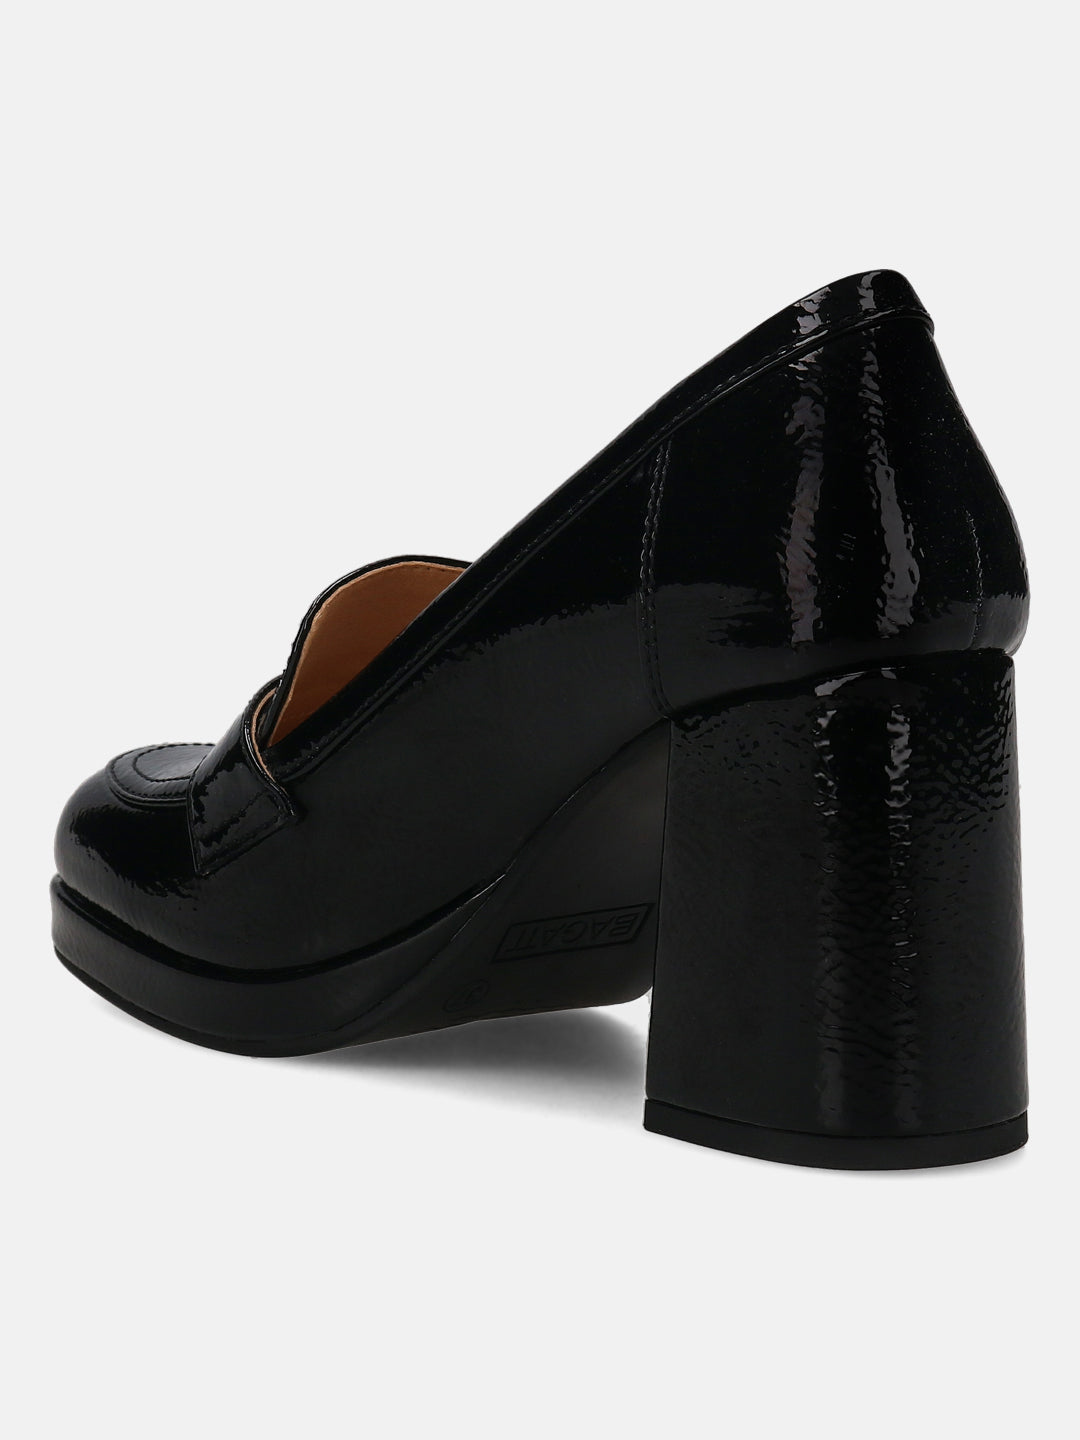 ASOS DESIGN Wide Fit Salary mid heeled court shoes in black | ASOS